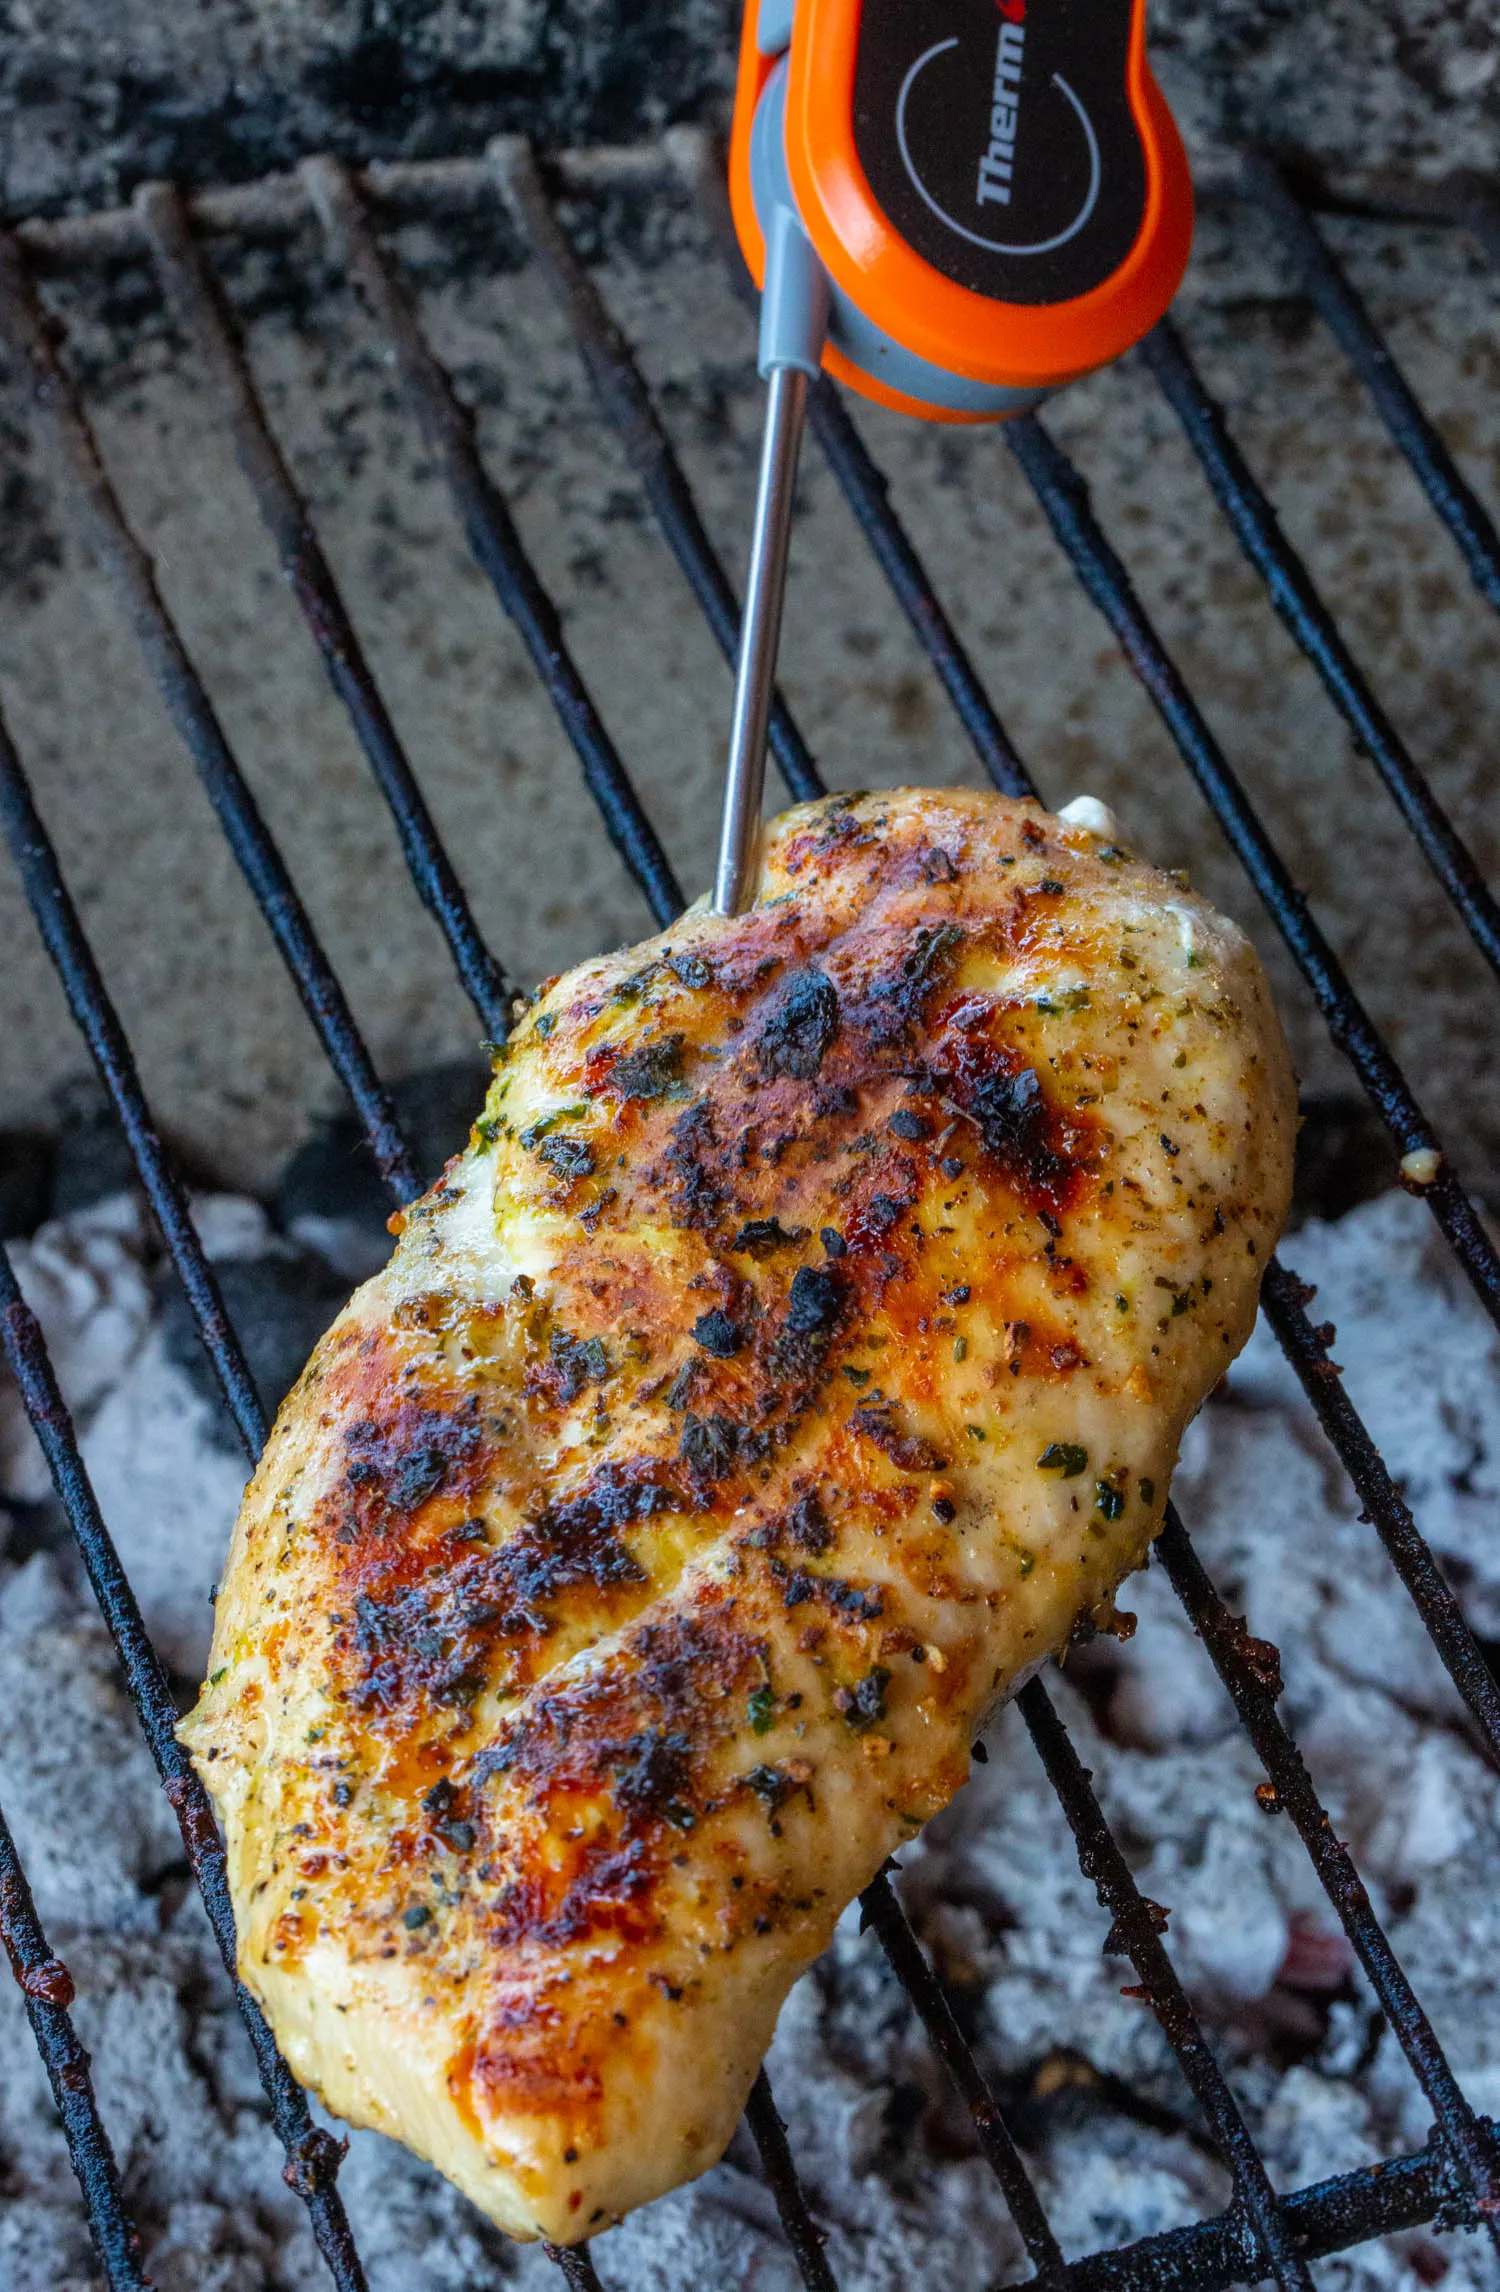 A grilled chicken breast with a meat thermometer inserted